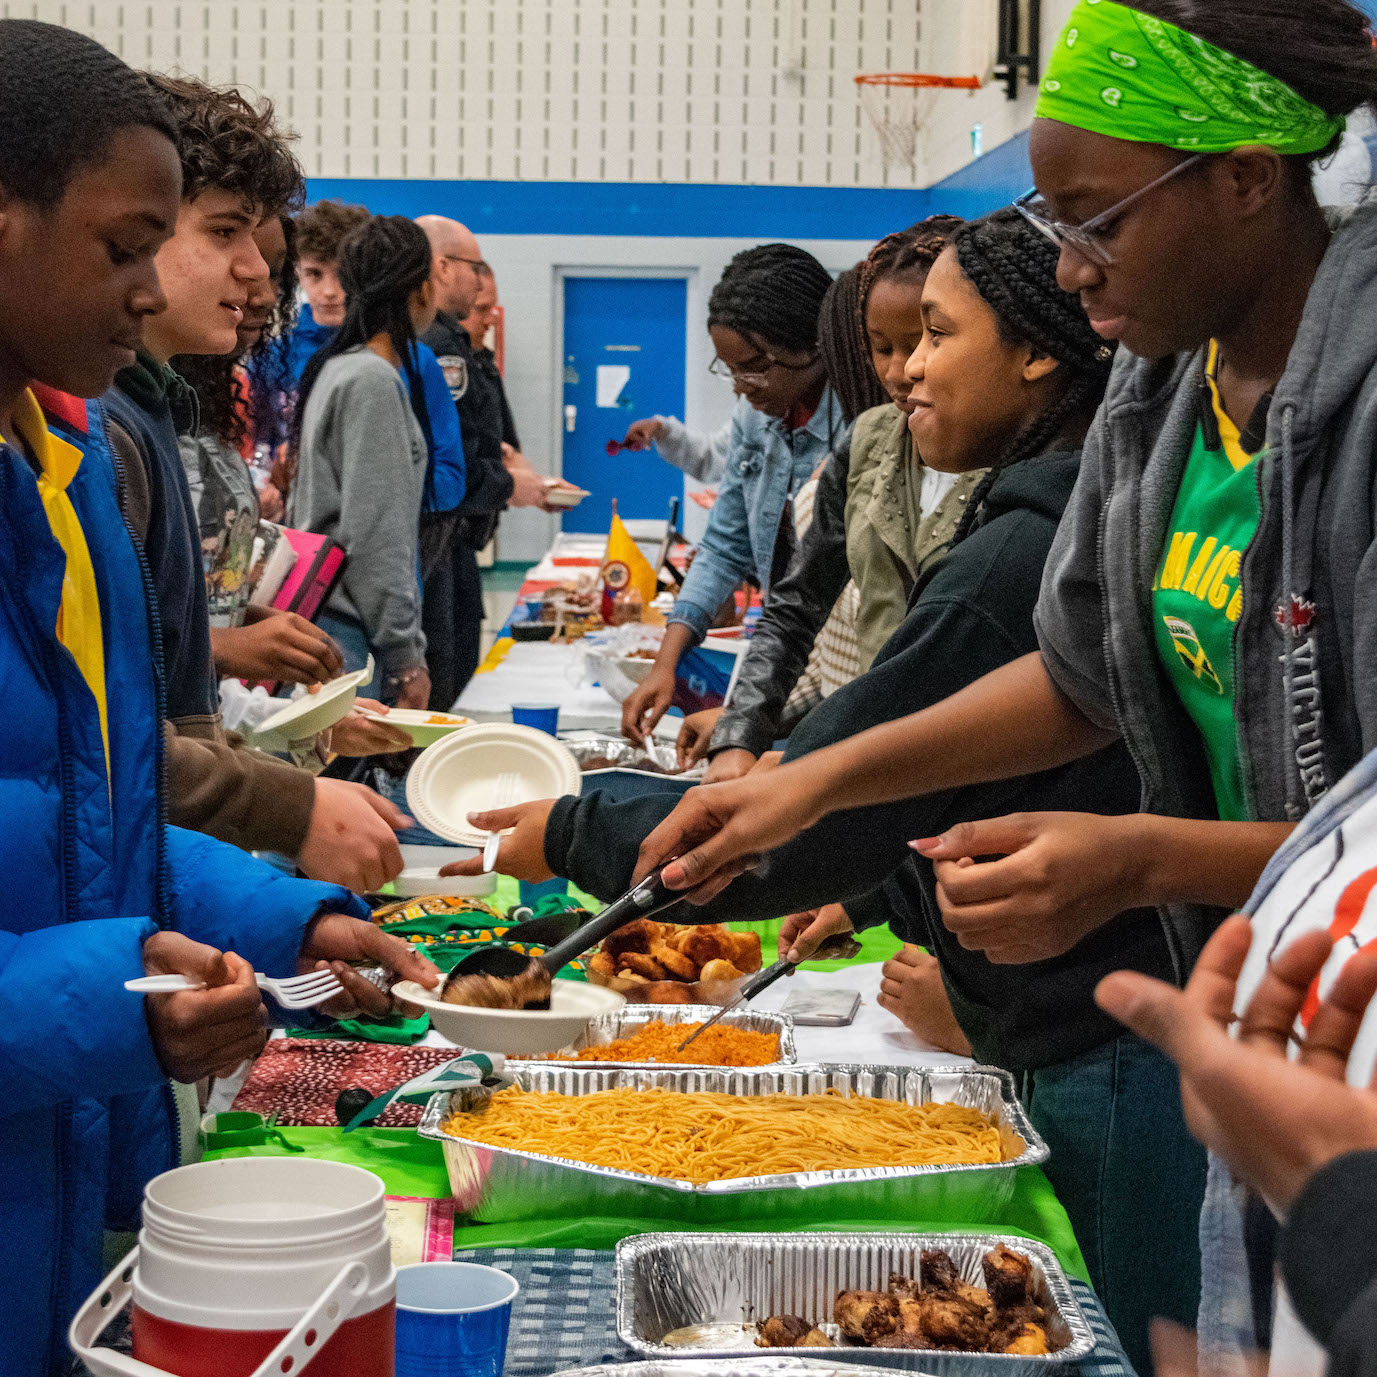 High school students handing out food to other high school students during a food fair.